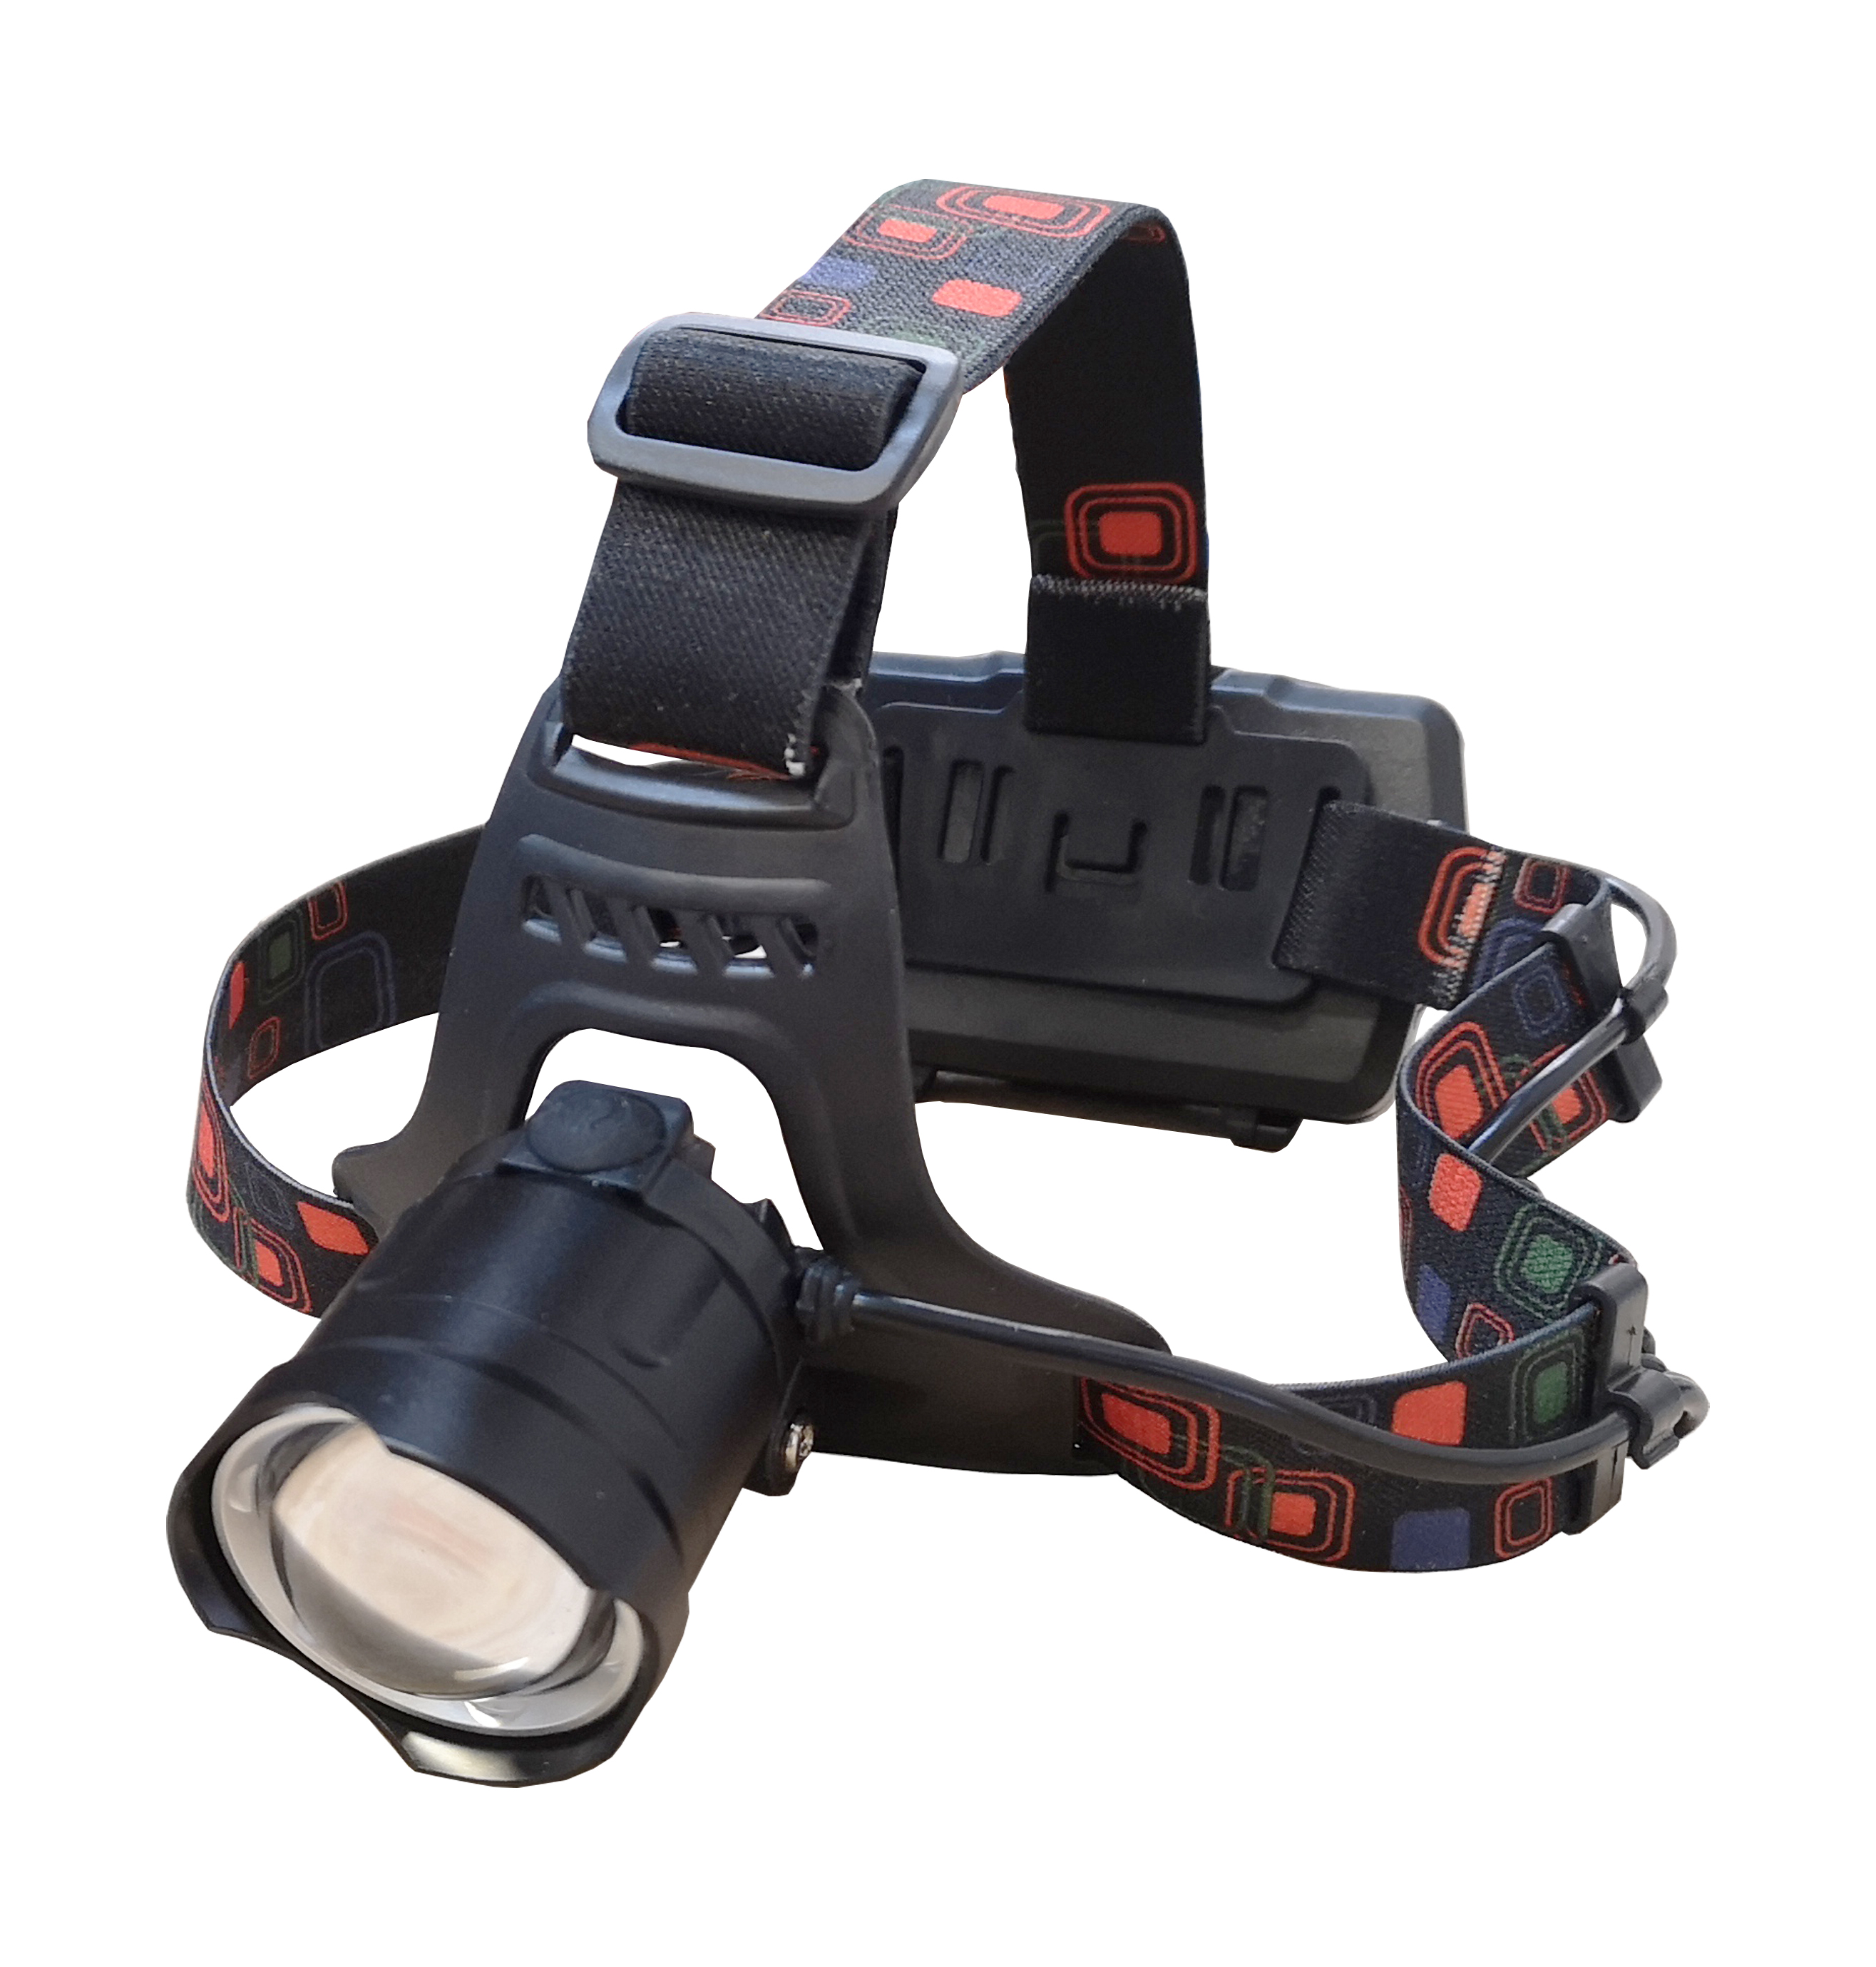 EXELITE LED 15W HEADLAMP SUPER BRIGHT (1000 Lumens) Rechargeable WTY 1YR